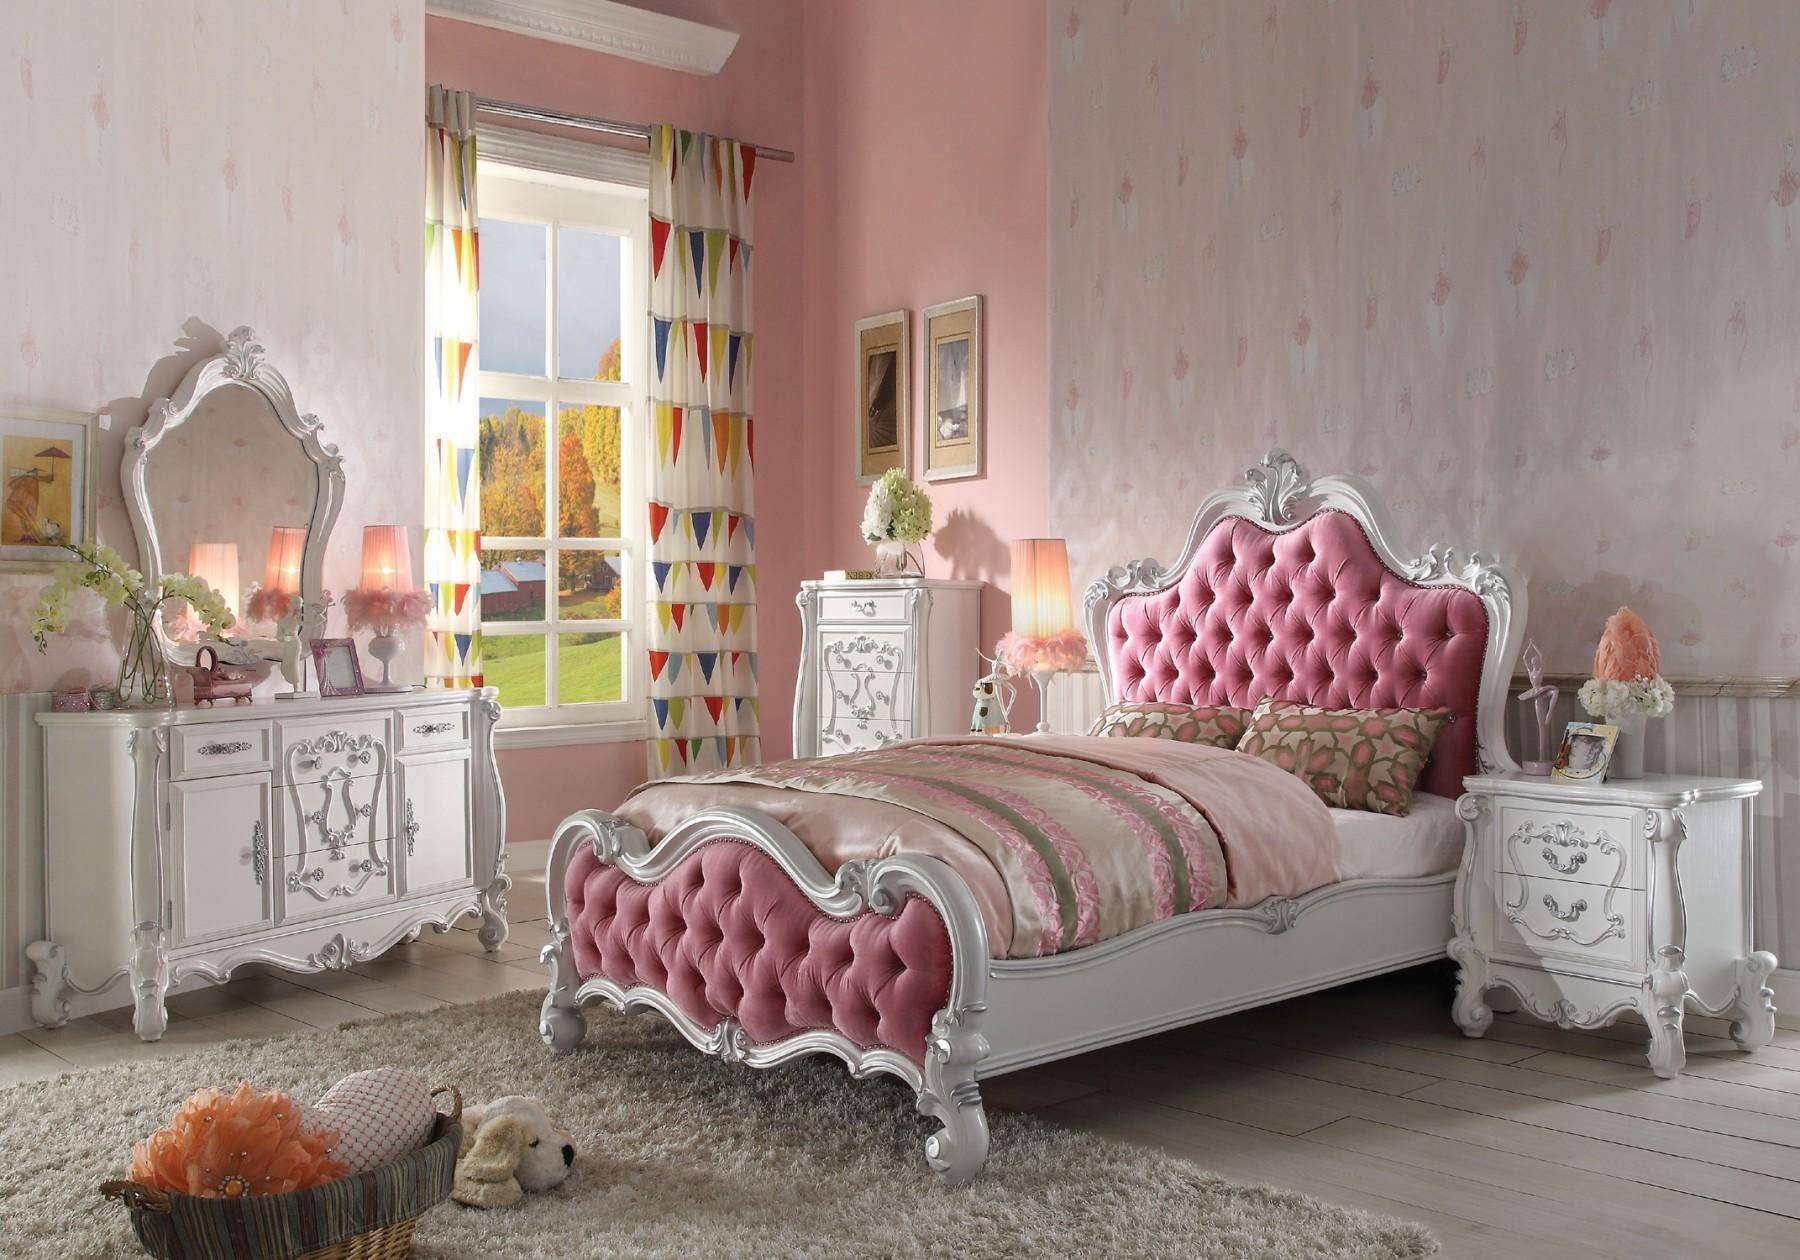 Discount Kids Bedroom Sets
 Acme Furniture F Versailles Pink and Antique White